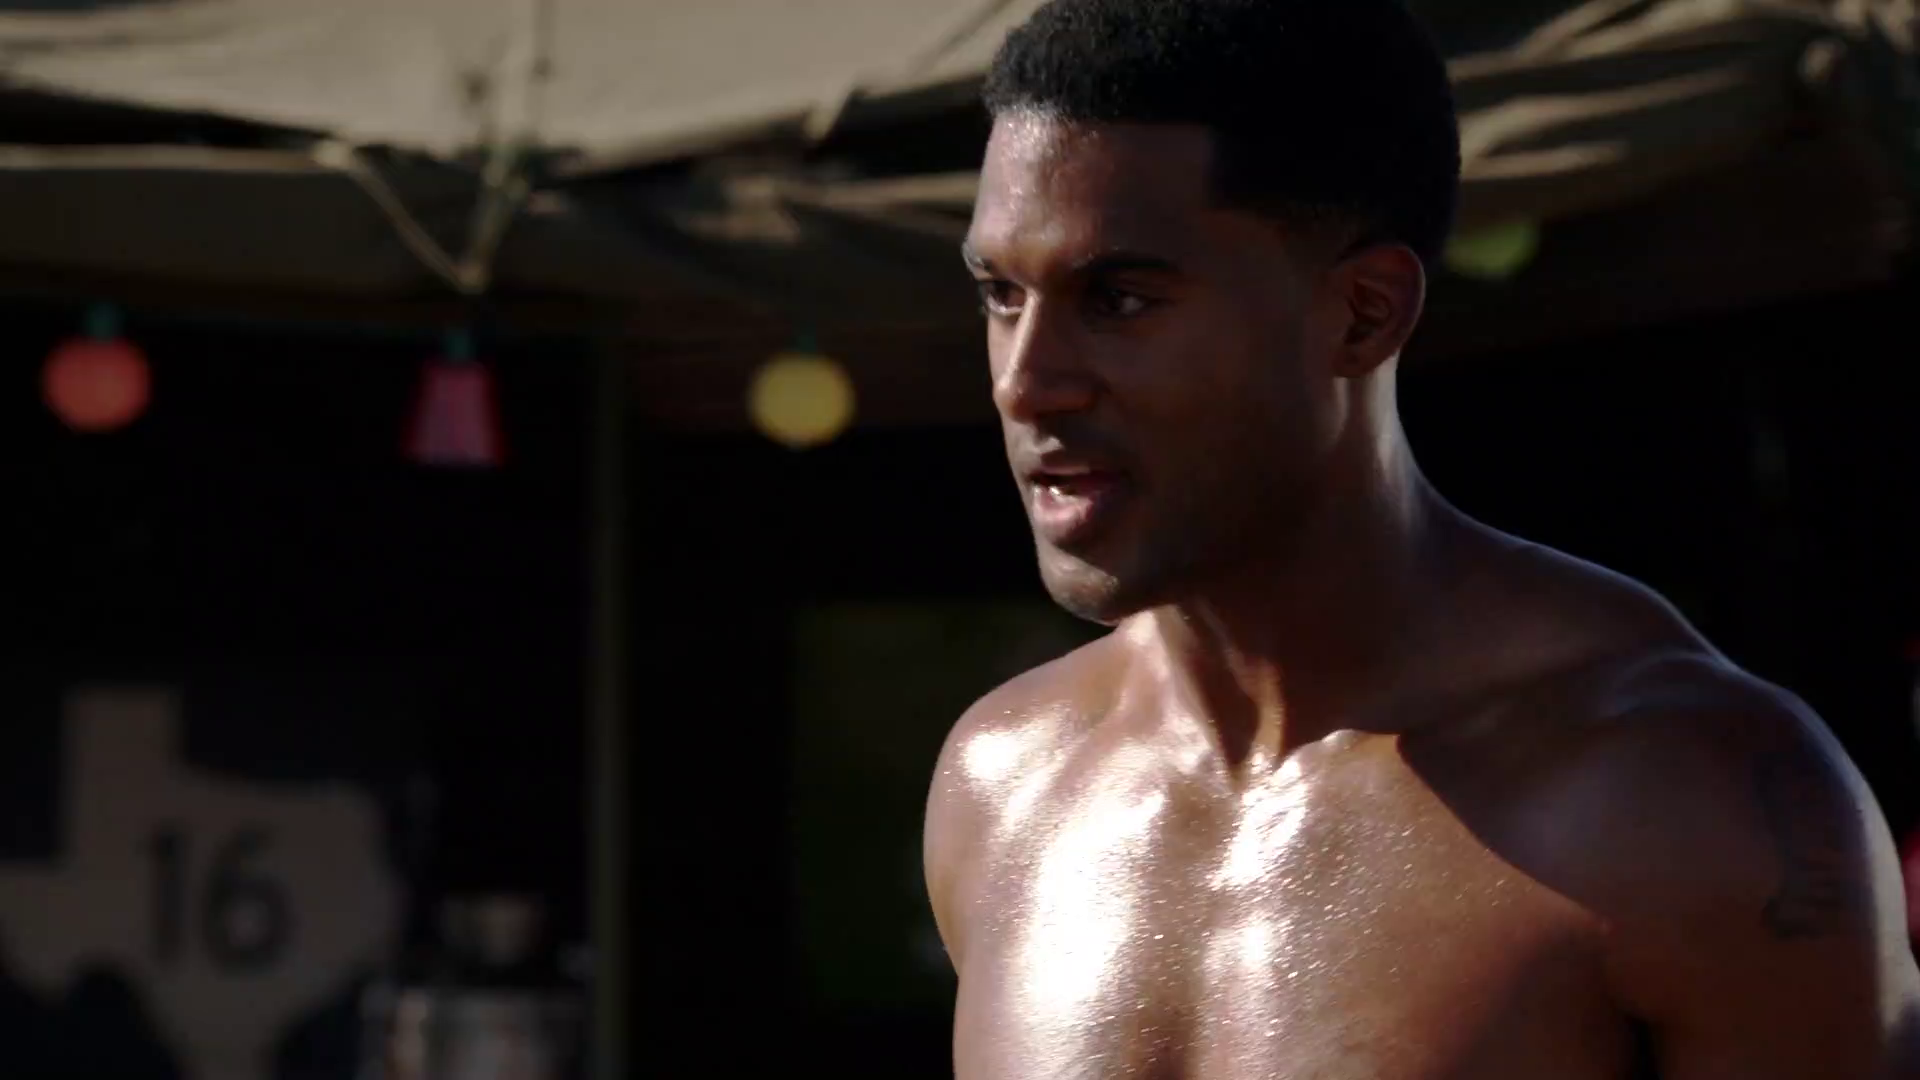 JR Lemon shirtless in The Night Shift 1-02 "Second Chances" .